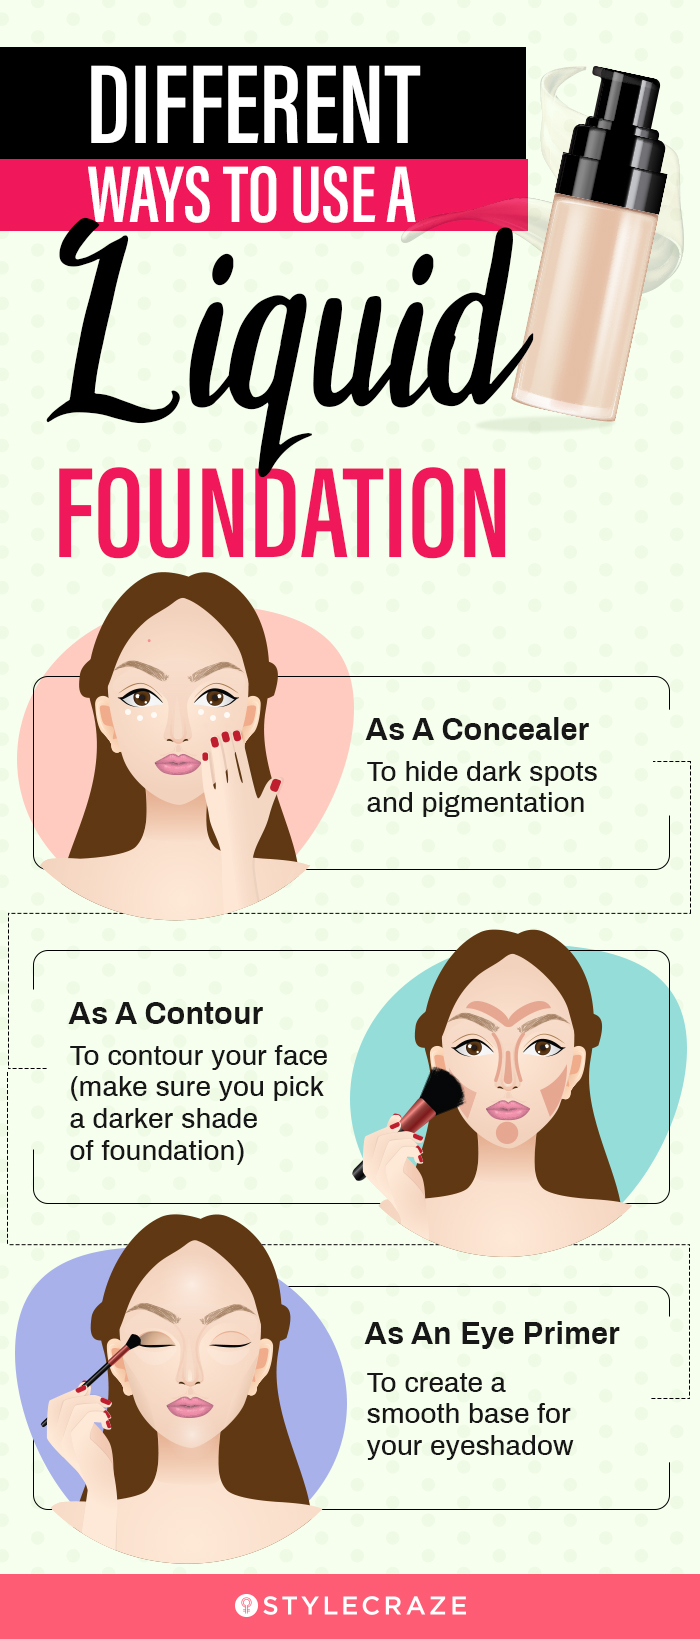 Different-Ways-To-Use-A-Liquid-Foundation-1